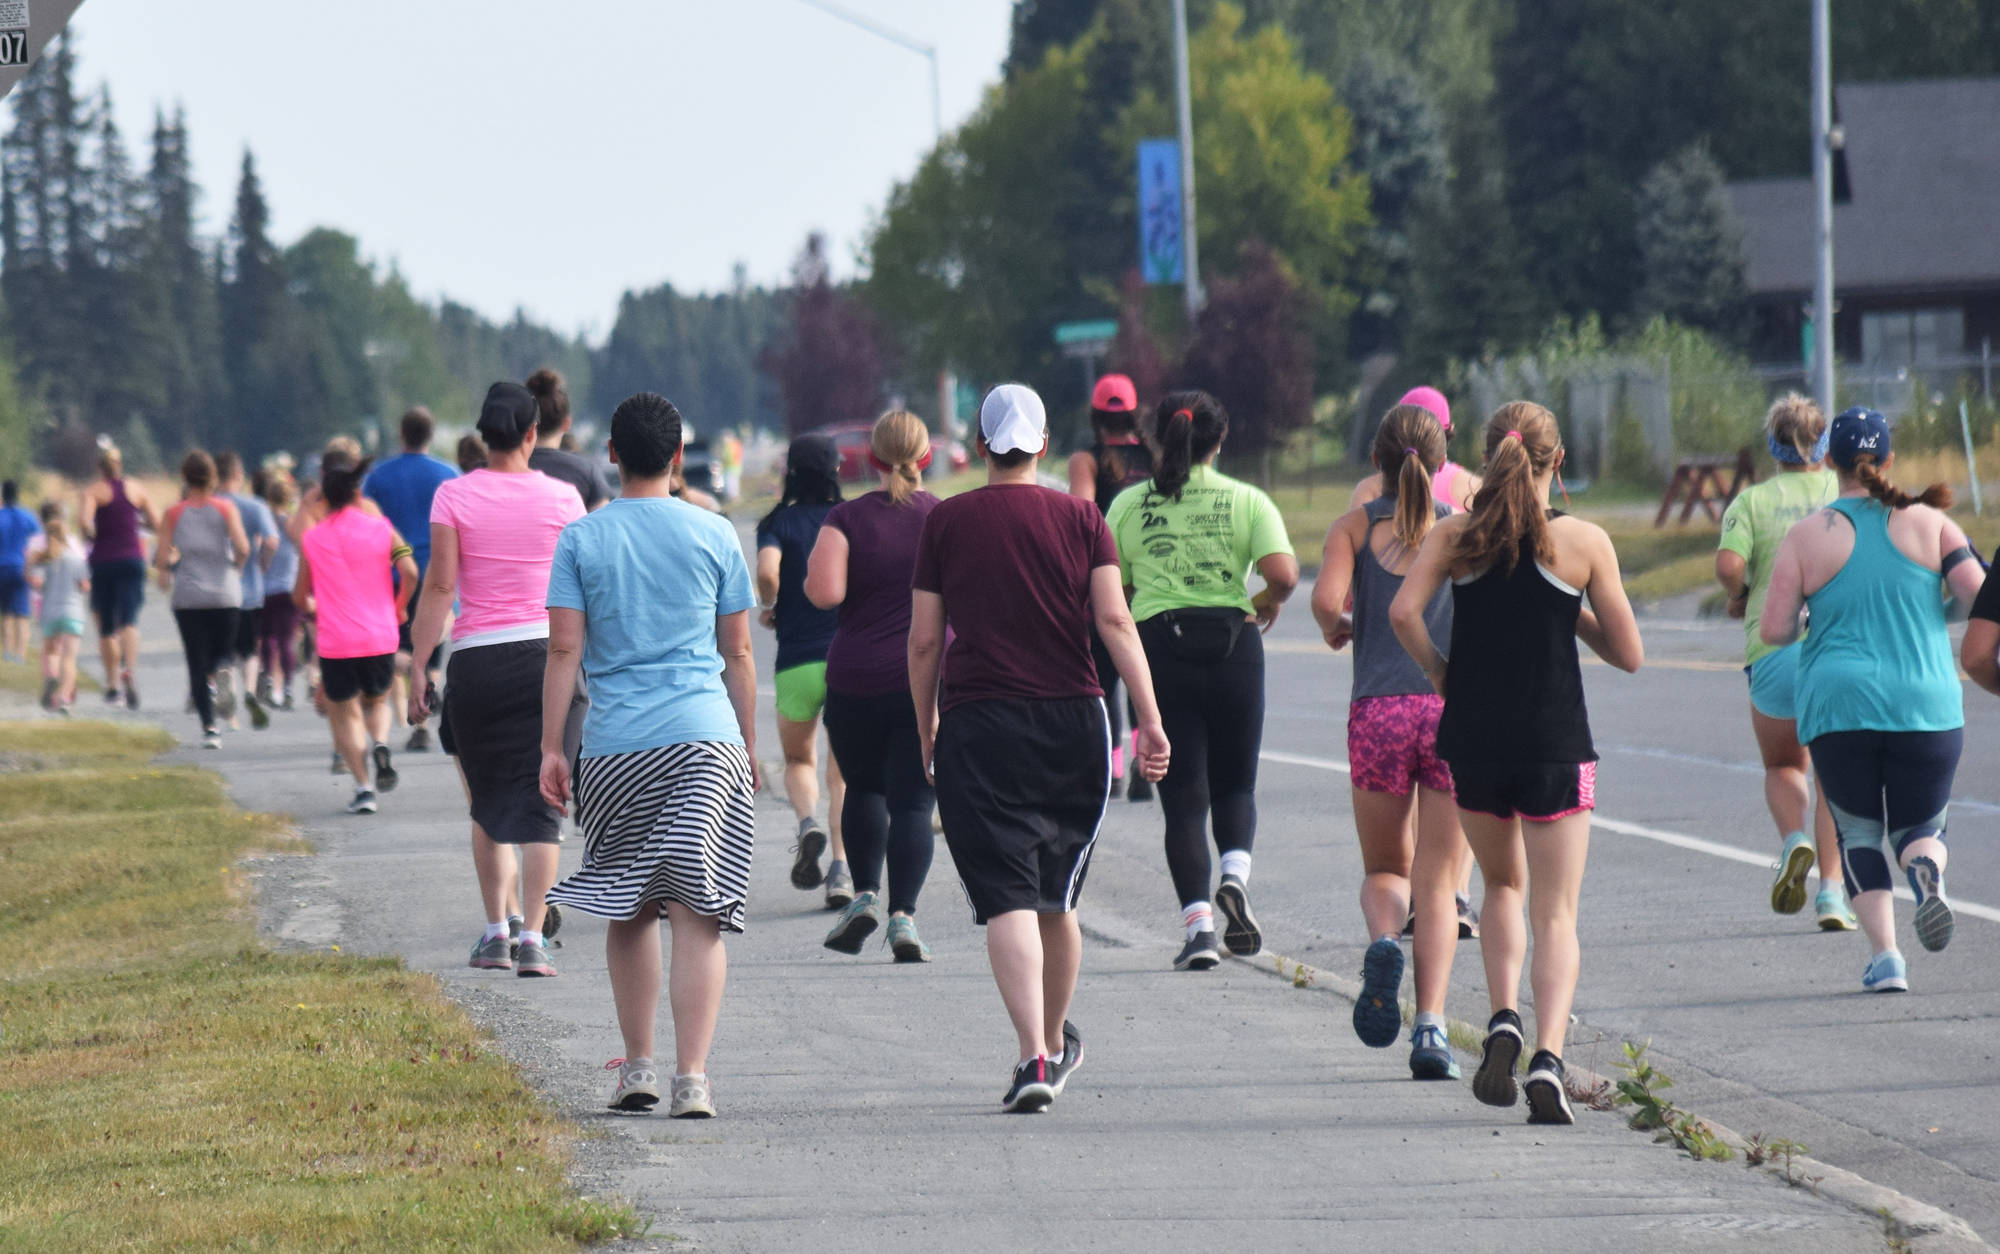 The field of 5K and 10K runners and walkers take to the streets Saturday, Aug. 10, 2019, at the 32nd annual Run for Women in Kenai, Alaska. (Photo by Joey Klecka/Peninsula Clarion)